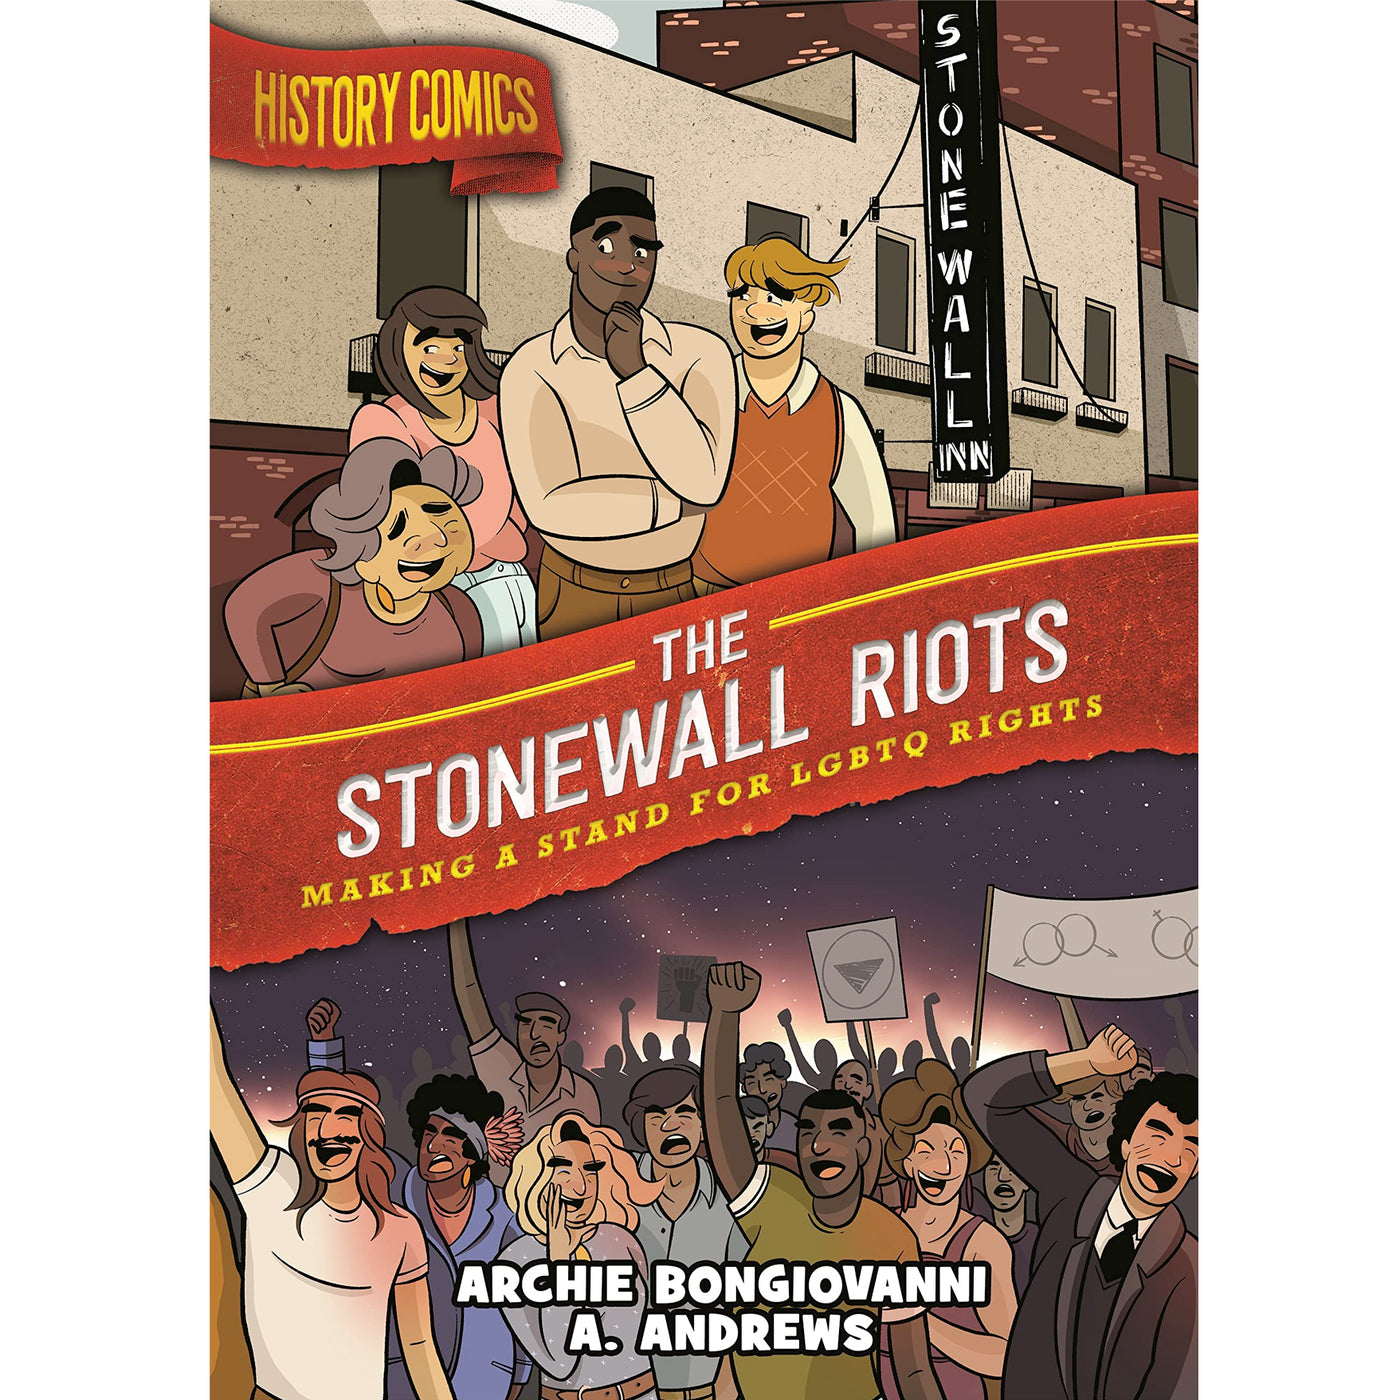 History Comics - The Stonewall Riots: Making a Stand for LGBTQ Rights Book